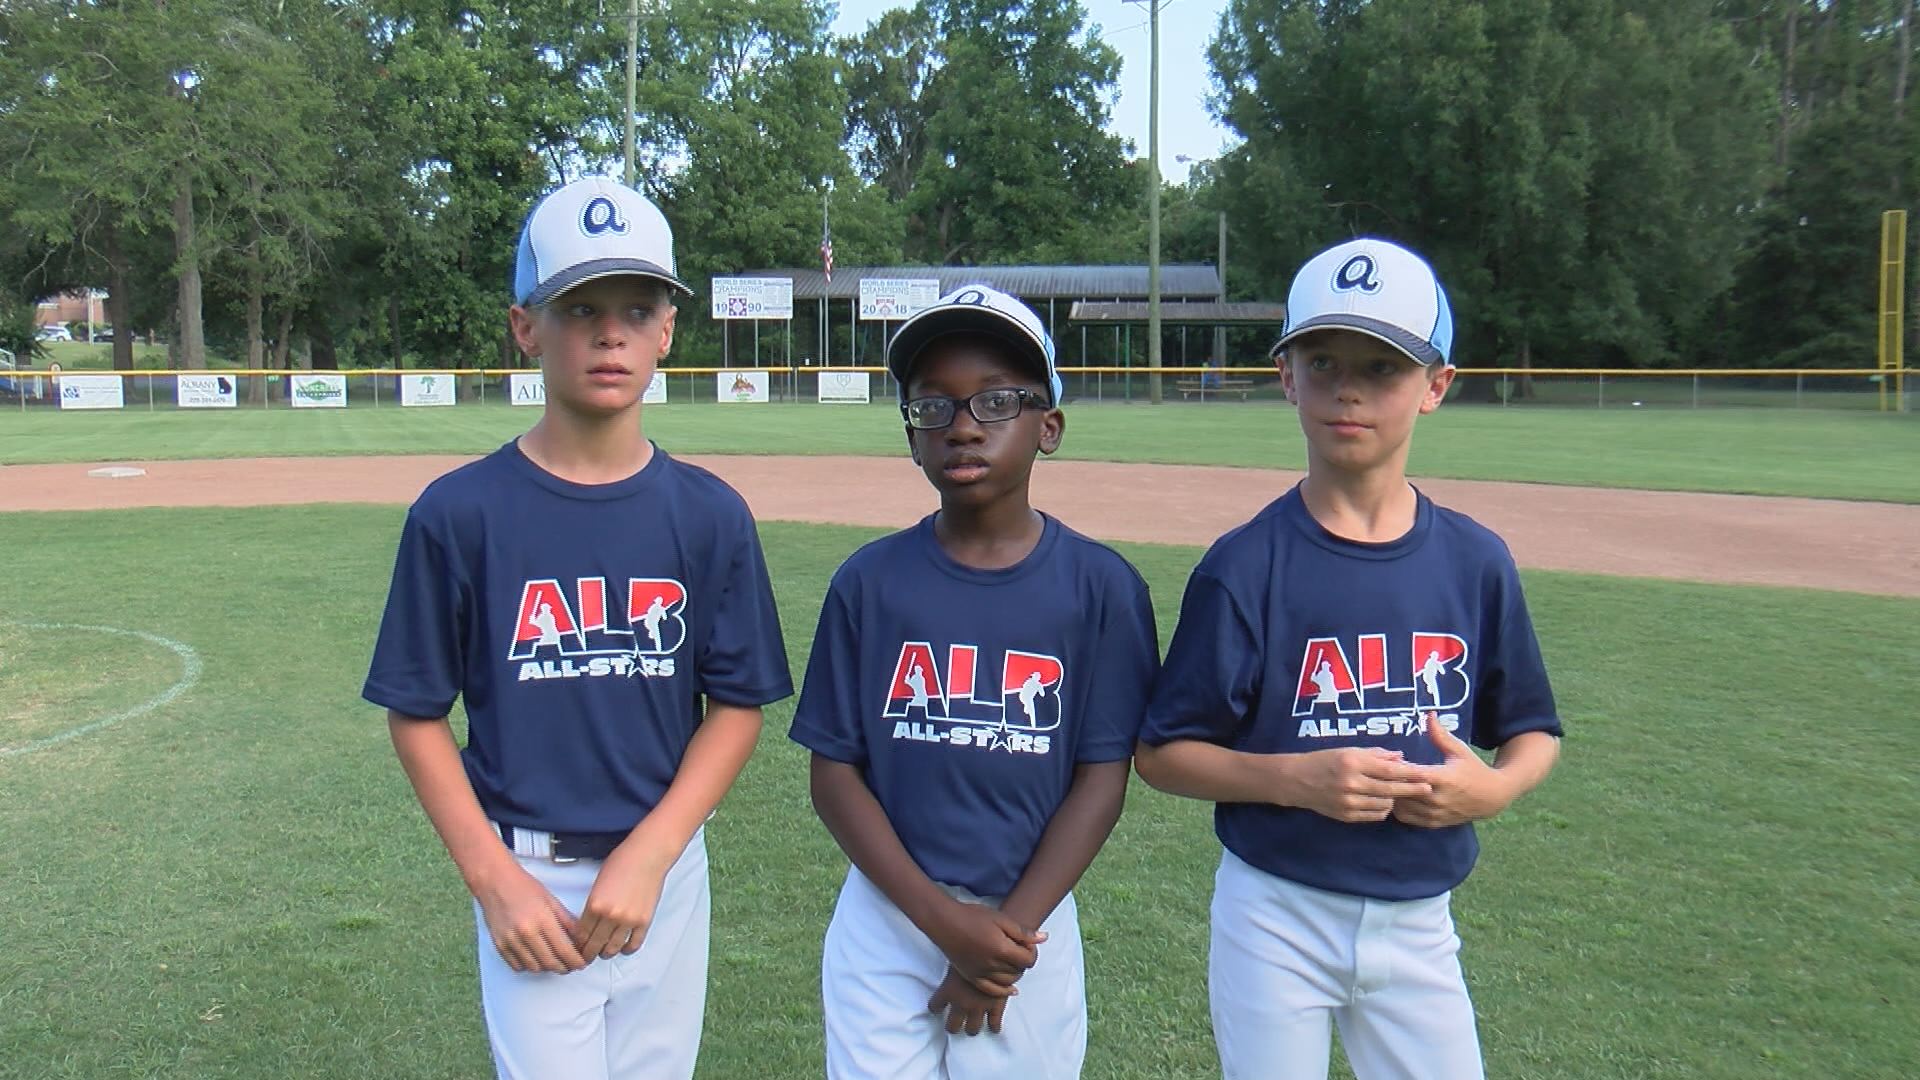 Albany American all-stars eliminated at DYB World Series